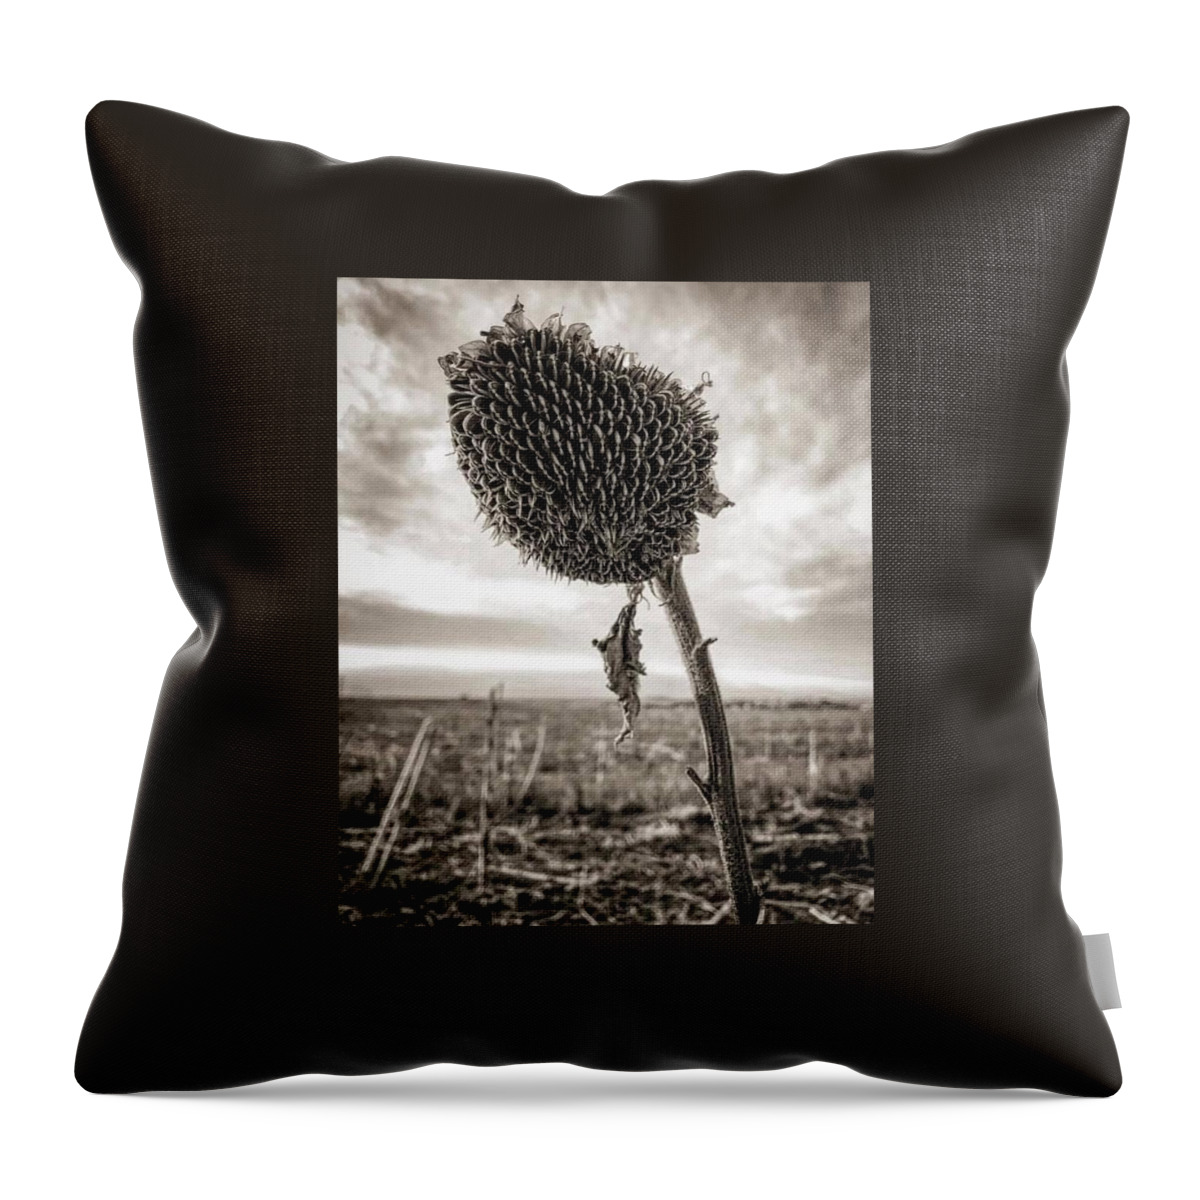 Iphonography Throw Pillow featuring the photograph iPhonography Sunflower 2 by Julie Powell